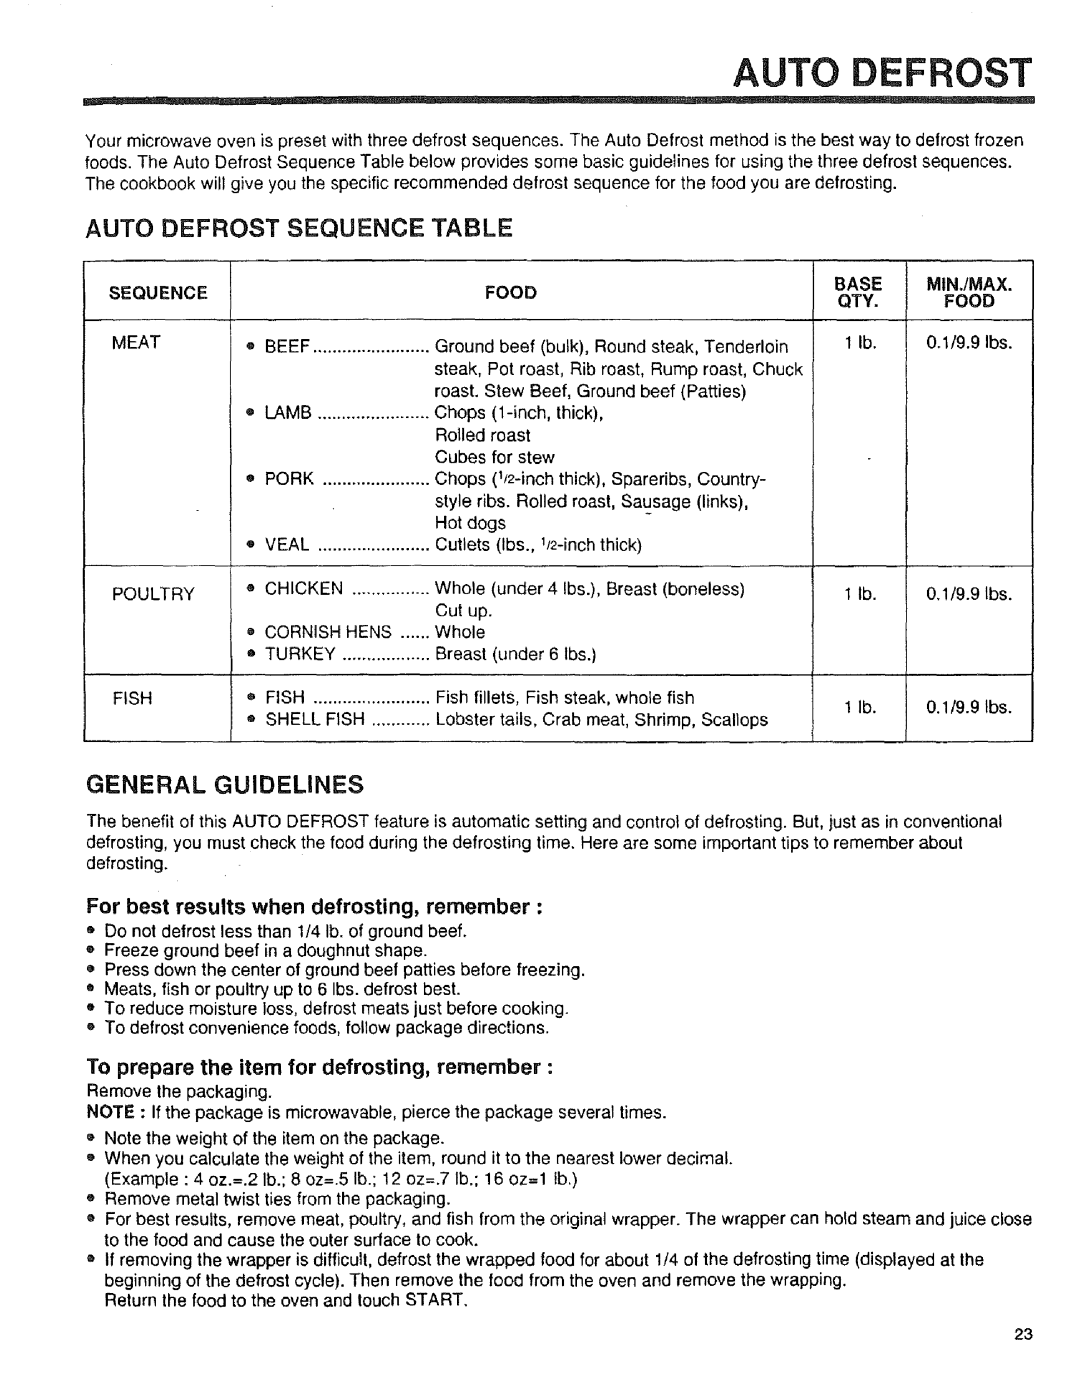 Sears 89950, 89952, 89951 Auto Defrost Sequence Table, General Guidelines, For best results when defrosting, remember 